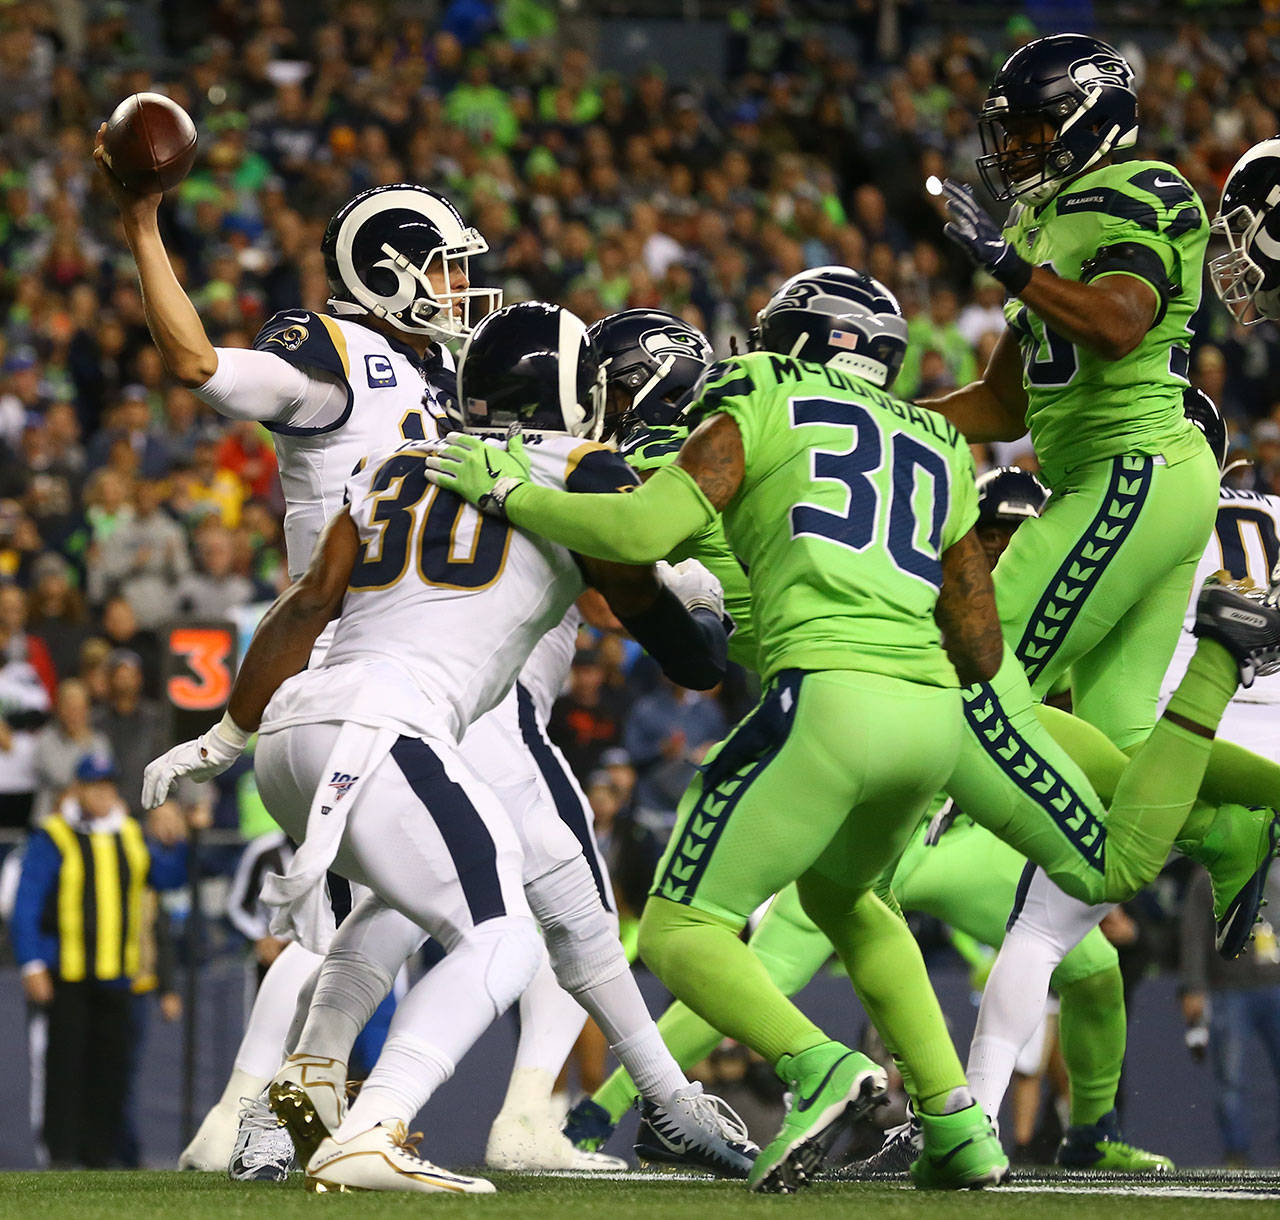 Seattle defenders collapse the pocket around L.A. Rams quarterback Jared Goff during the Seahawks 30-29 win over the L.A. Rams on Thursday at CenturyLink Field in Seattle.. (Kevin Clark / The Herald)